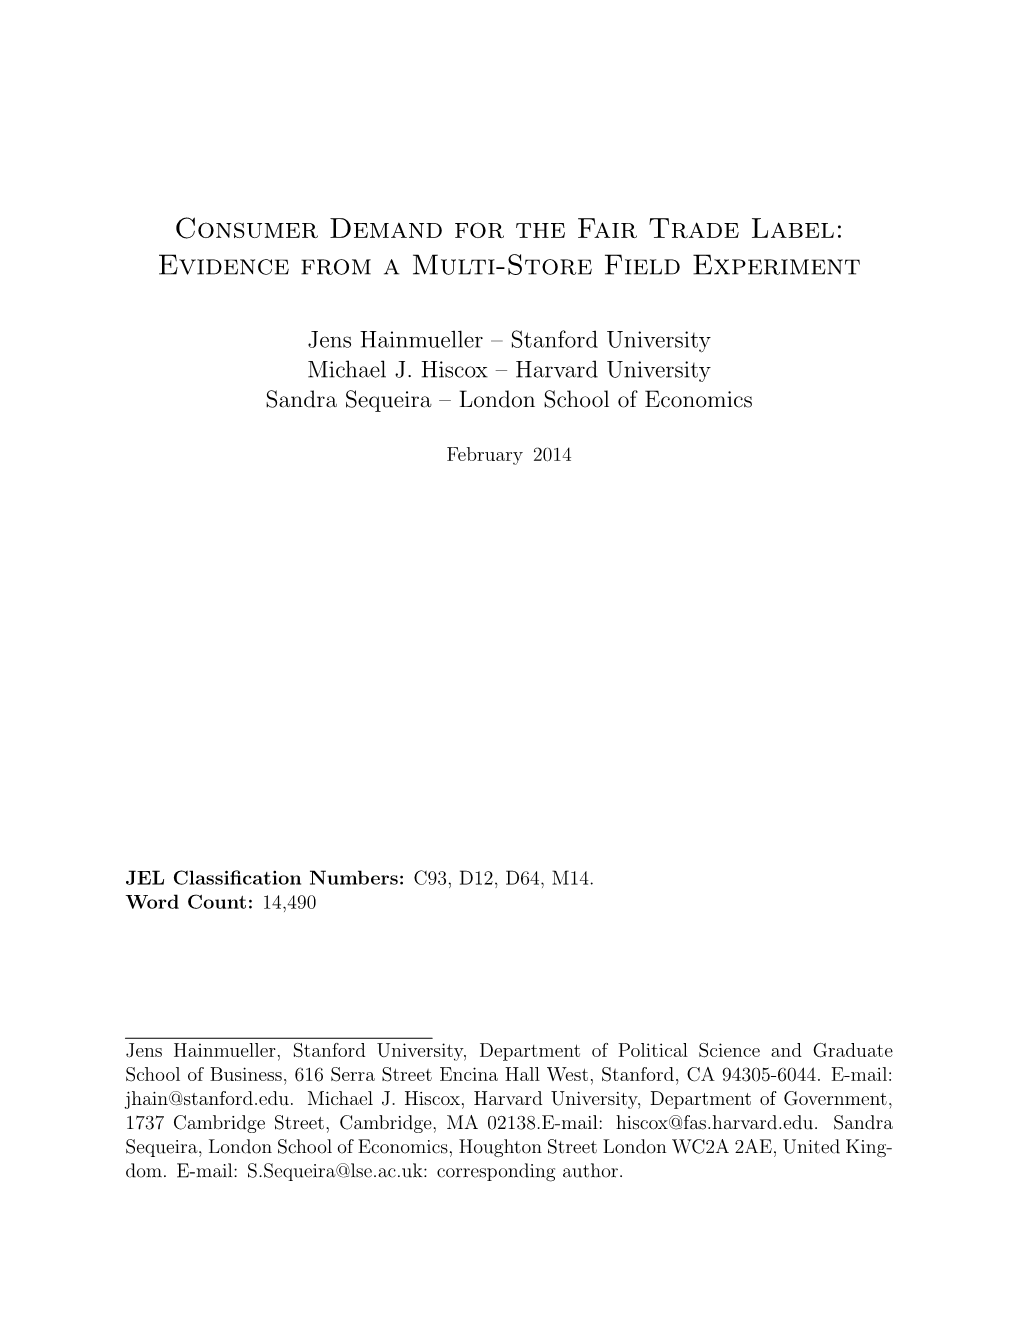 Consumer Demand for the Fair Trade Label: Evidence from a Multi-Store Field Experiment